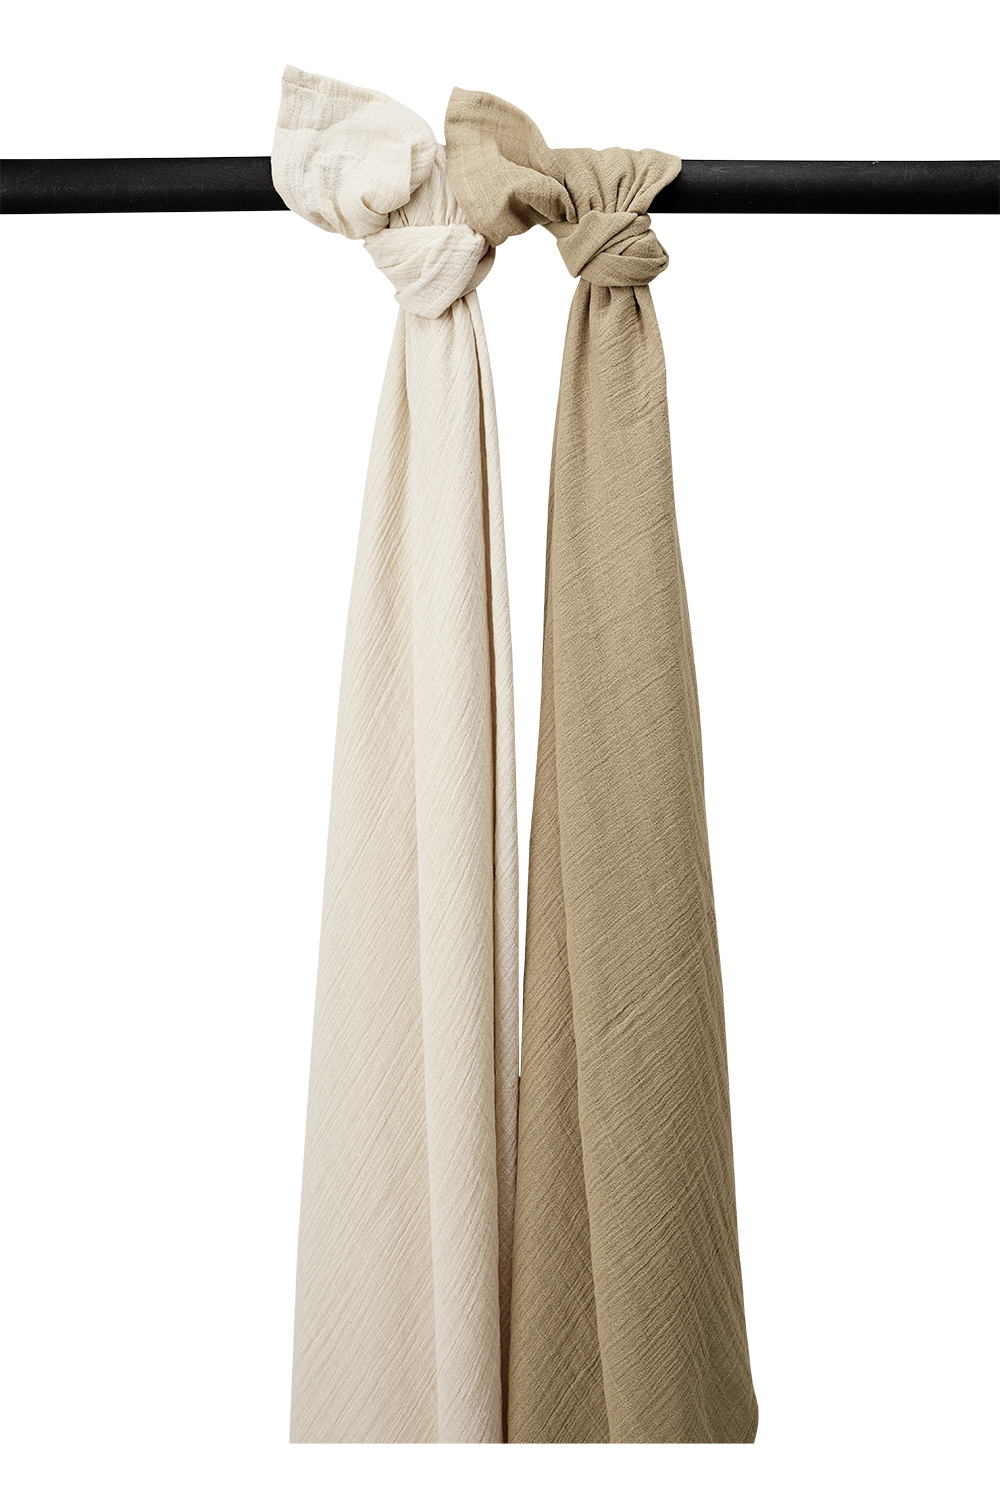 Swaddle 2-pack pre-washed hydrofiel Uni - soft sand/taupe - 120x120cm